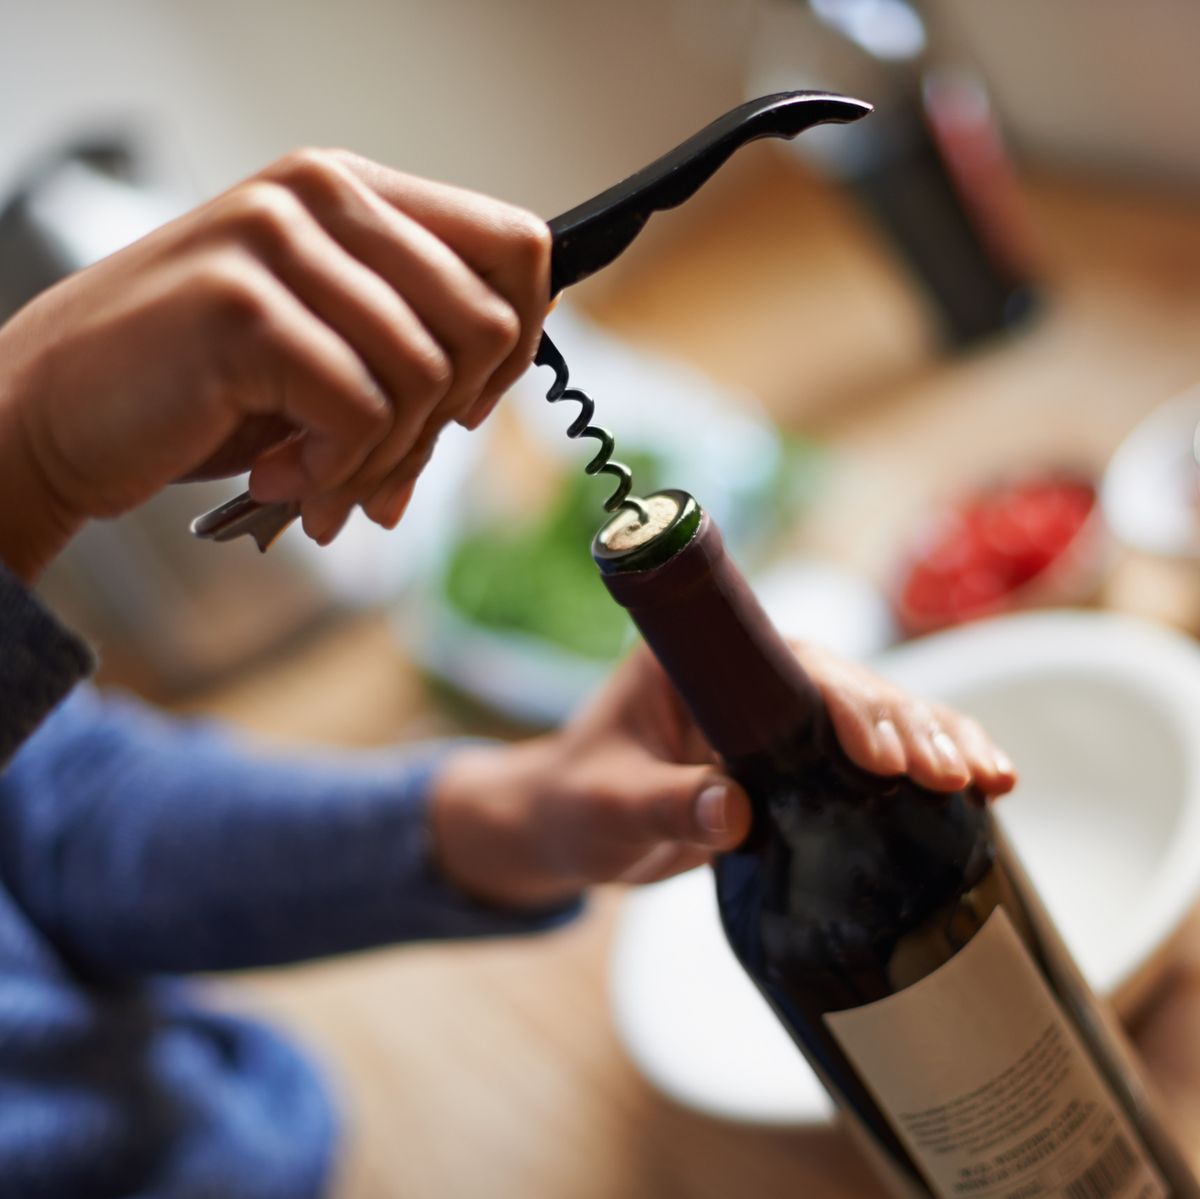 how to open a wine bottle